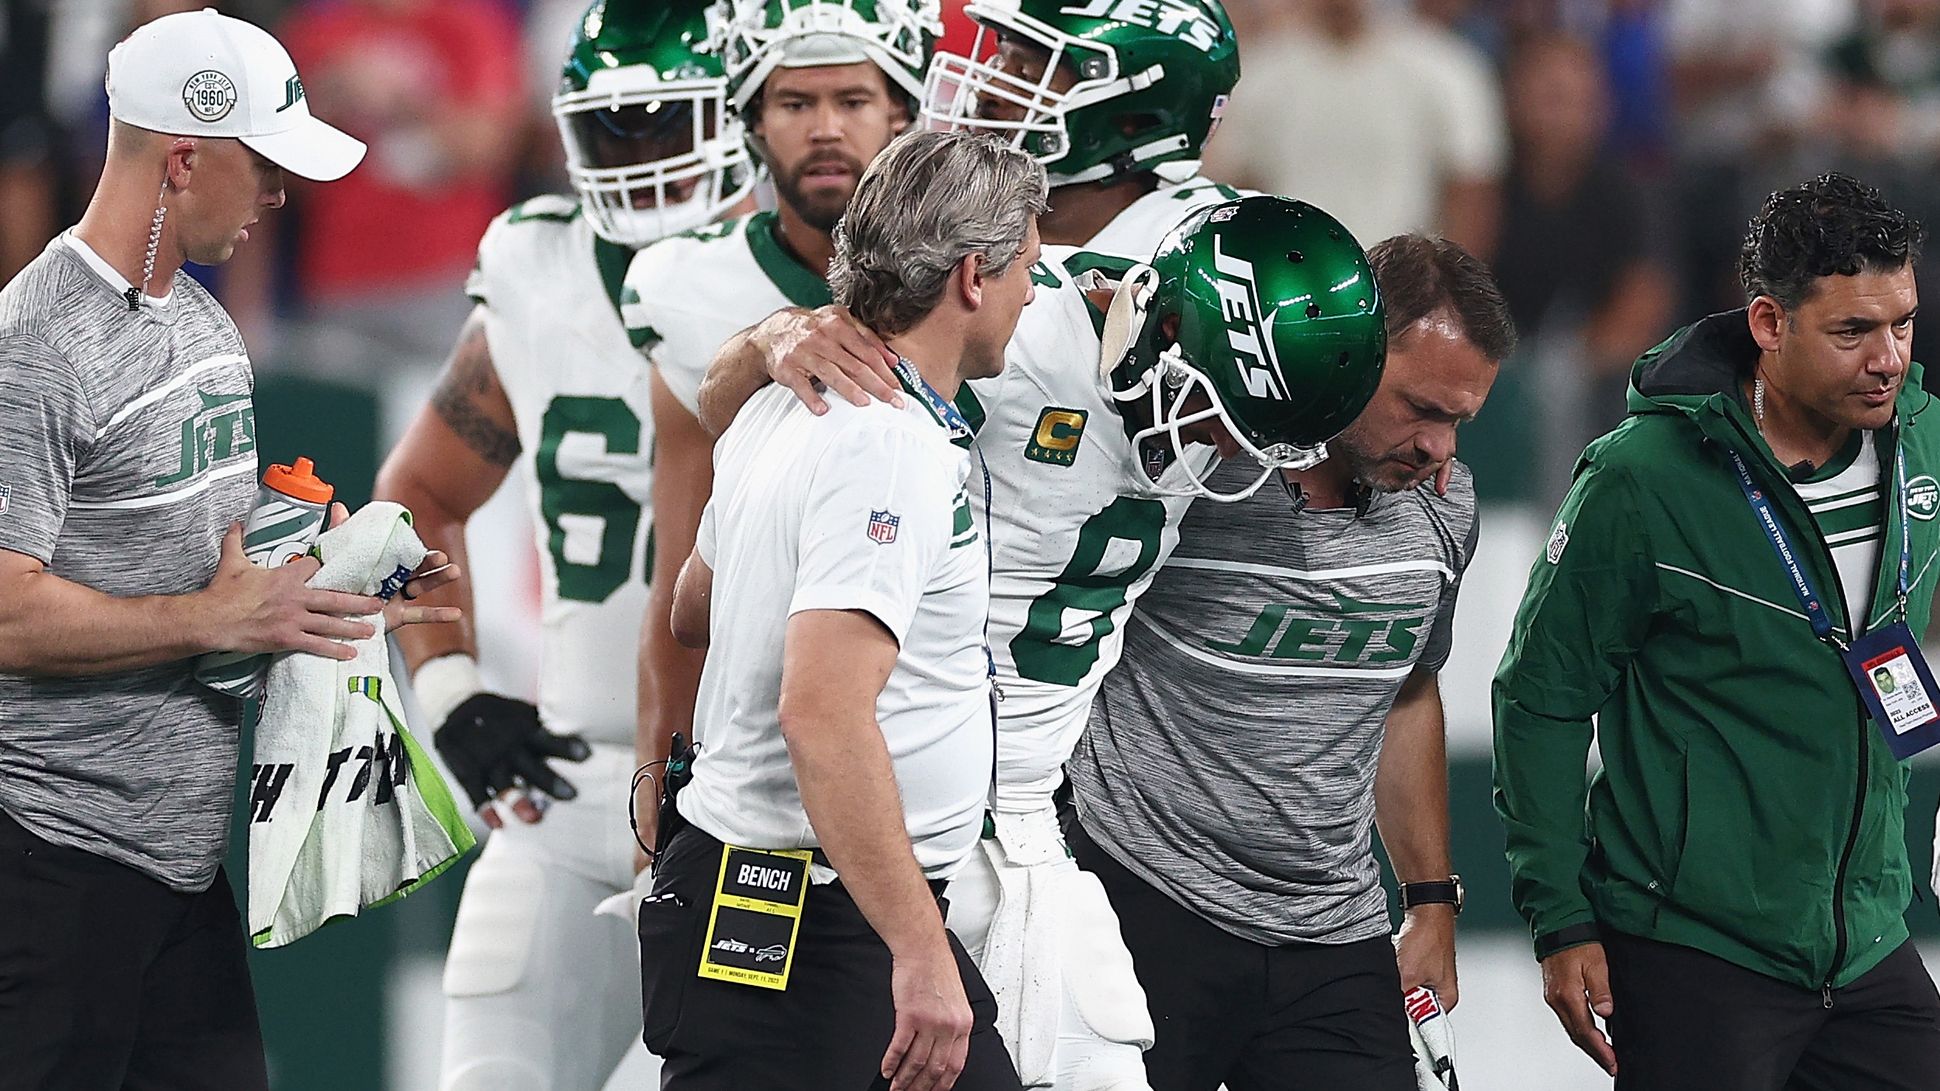 Quarterback Aaron Rodgers of the New York Jets is helped off the field.